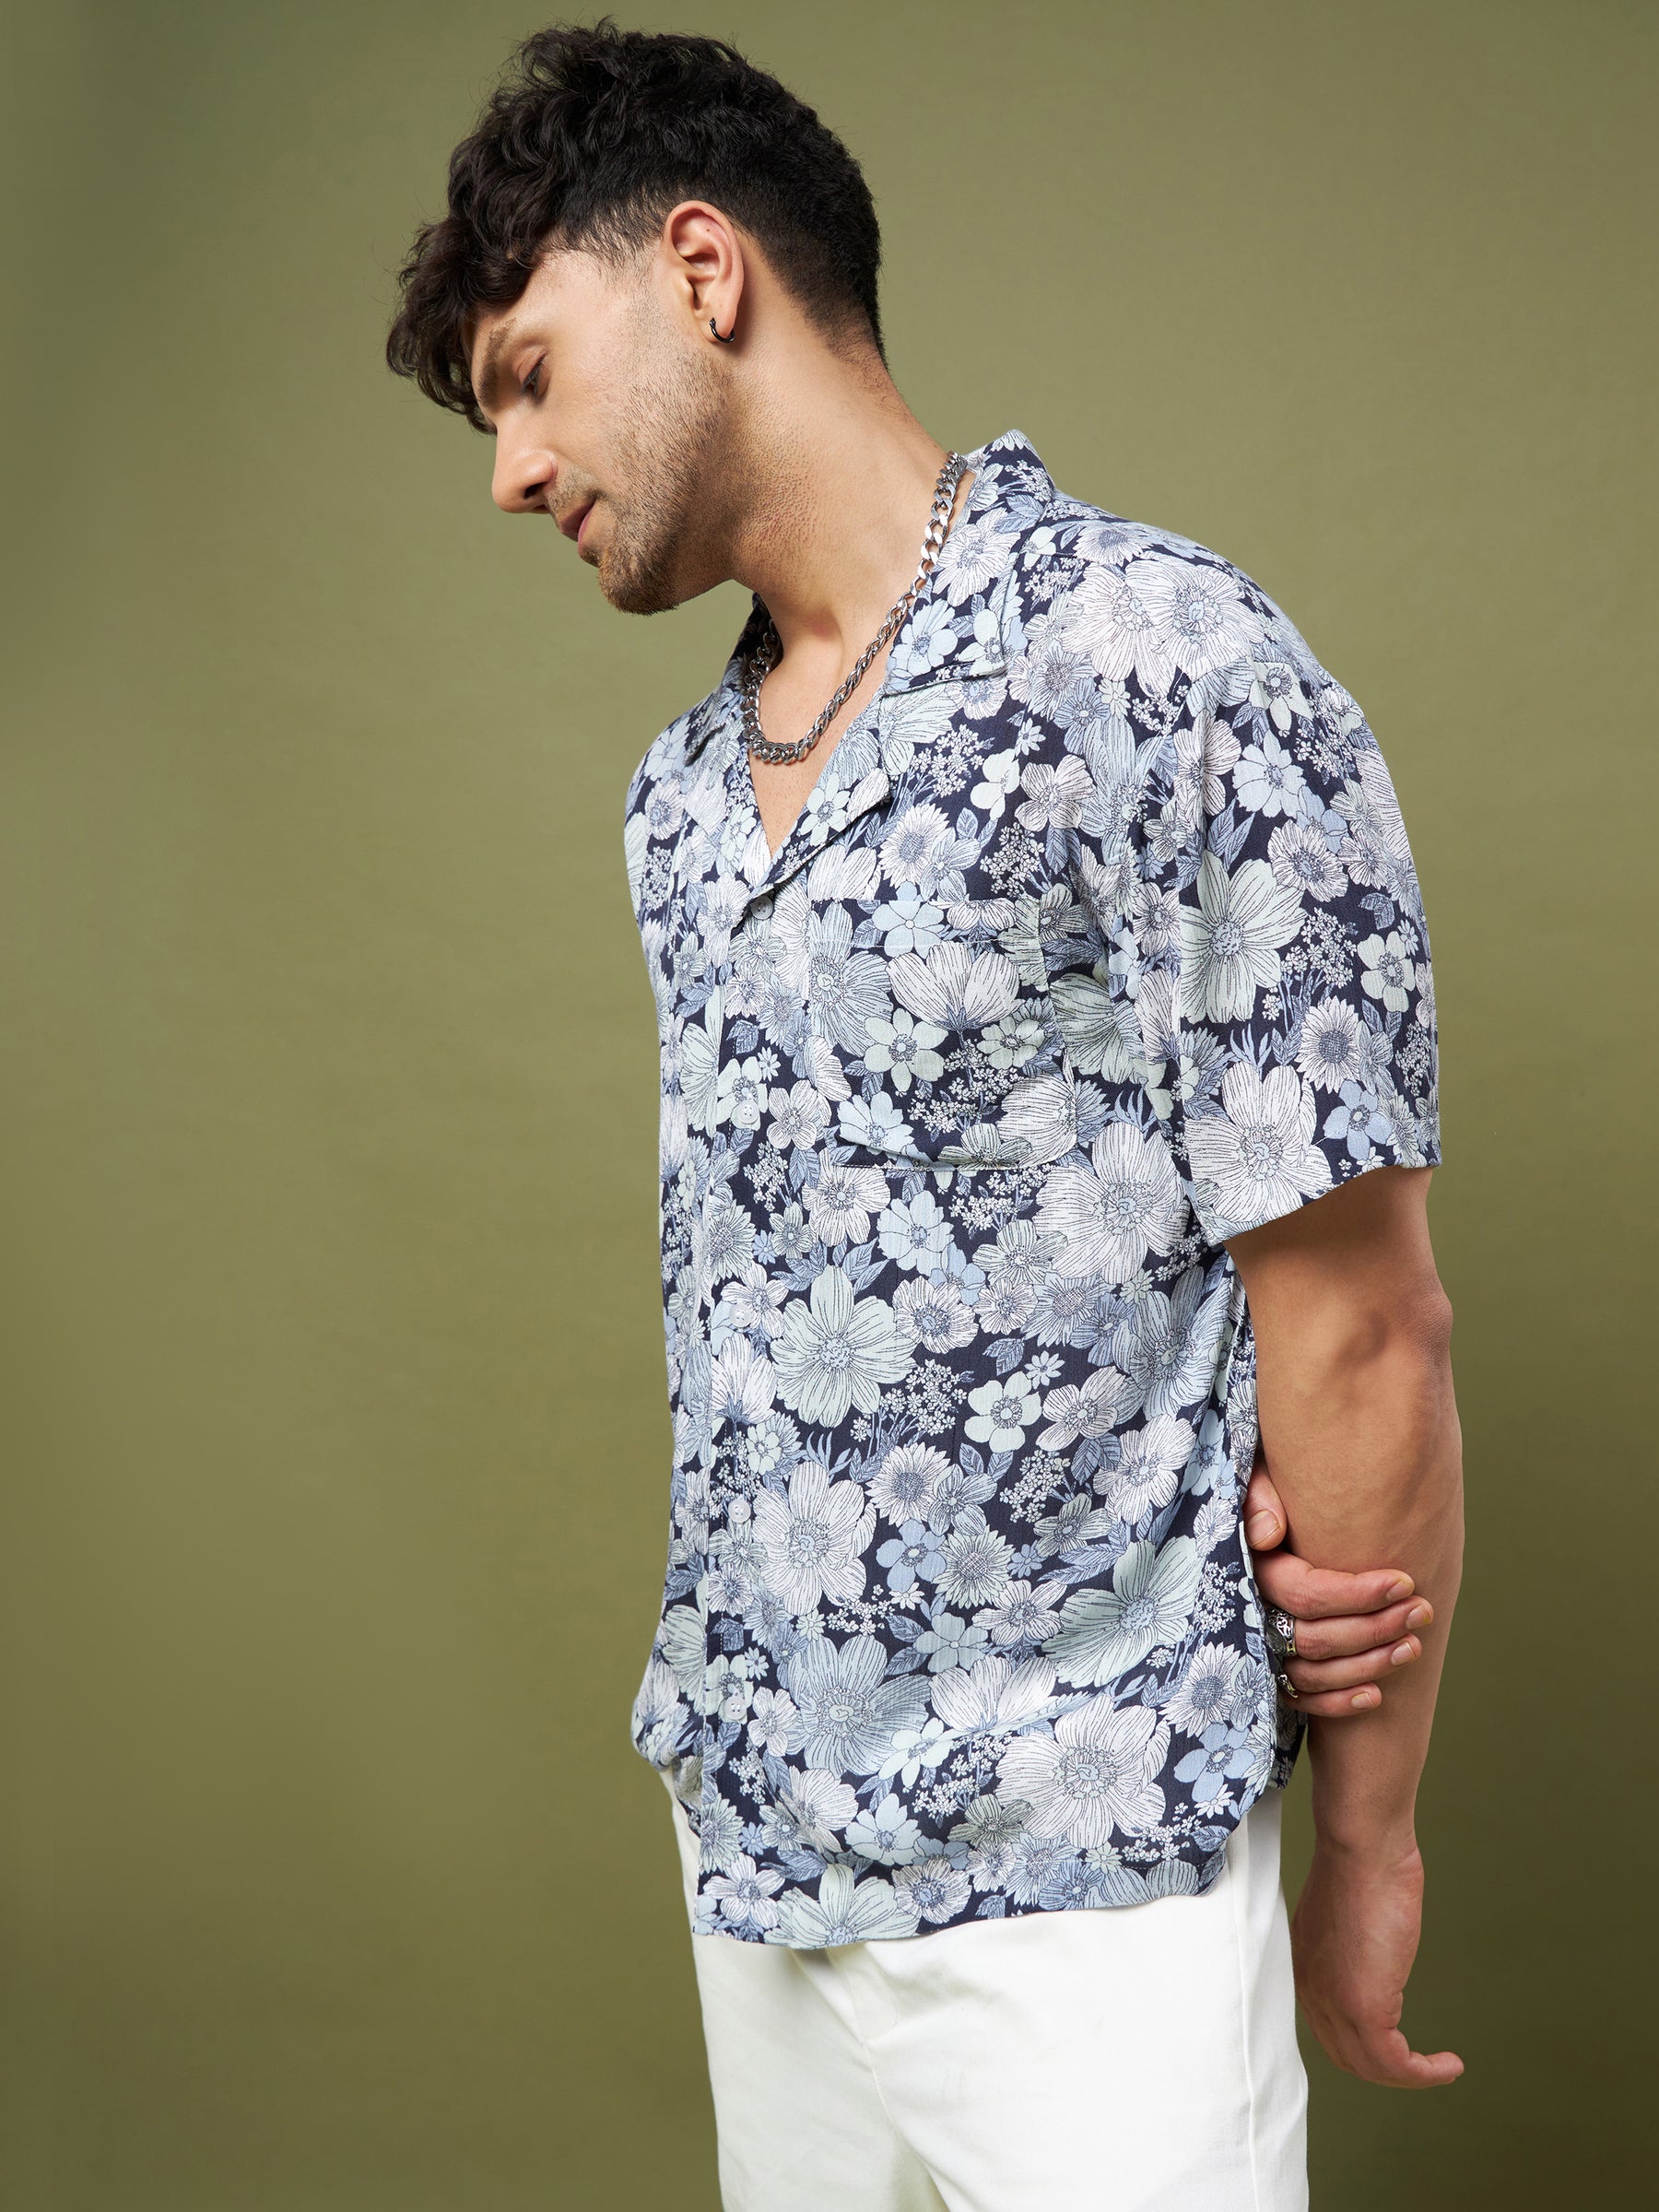 Unisex White & Blue Floral Print Relax Fit Shirt